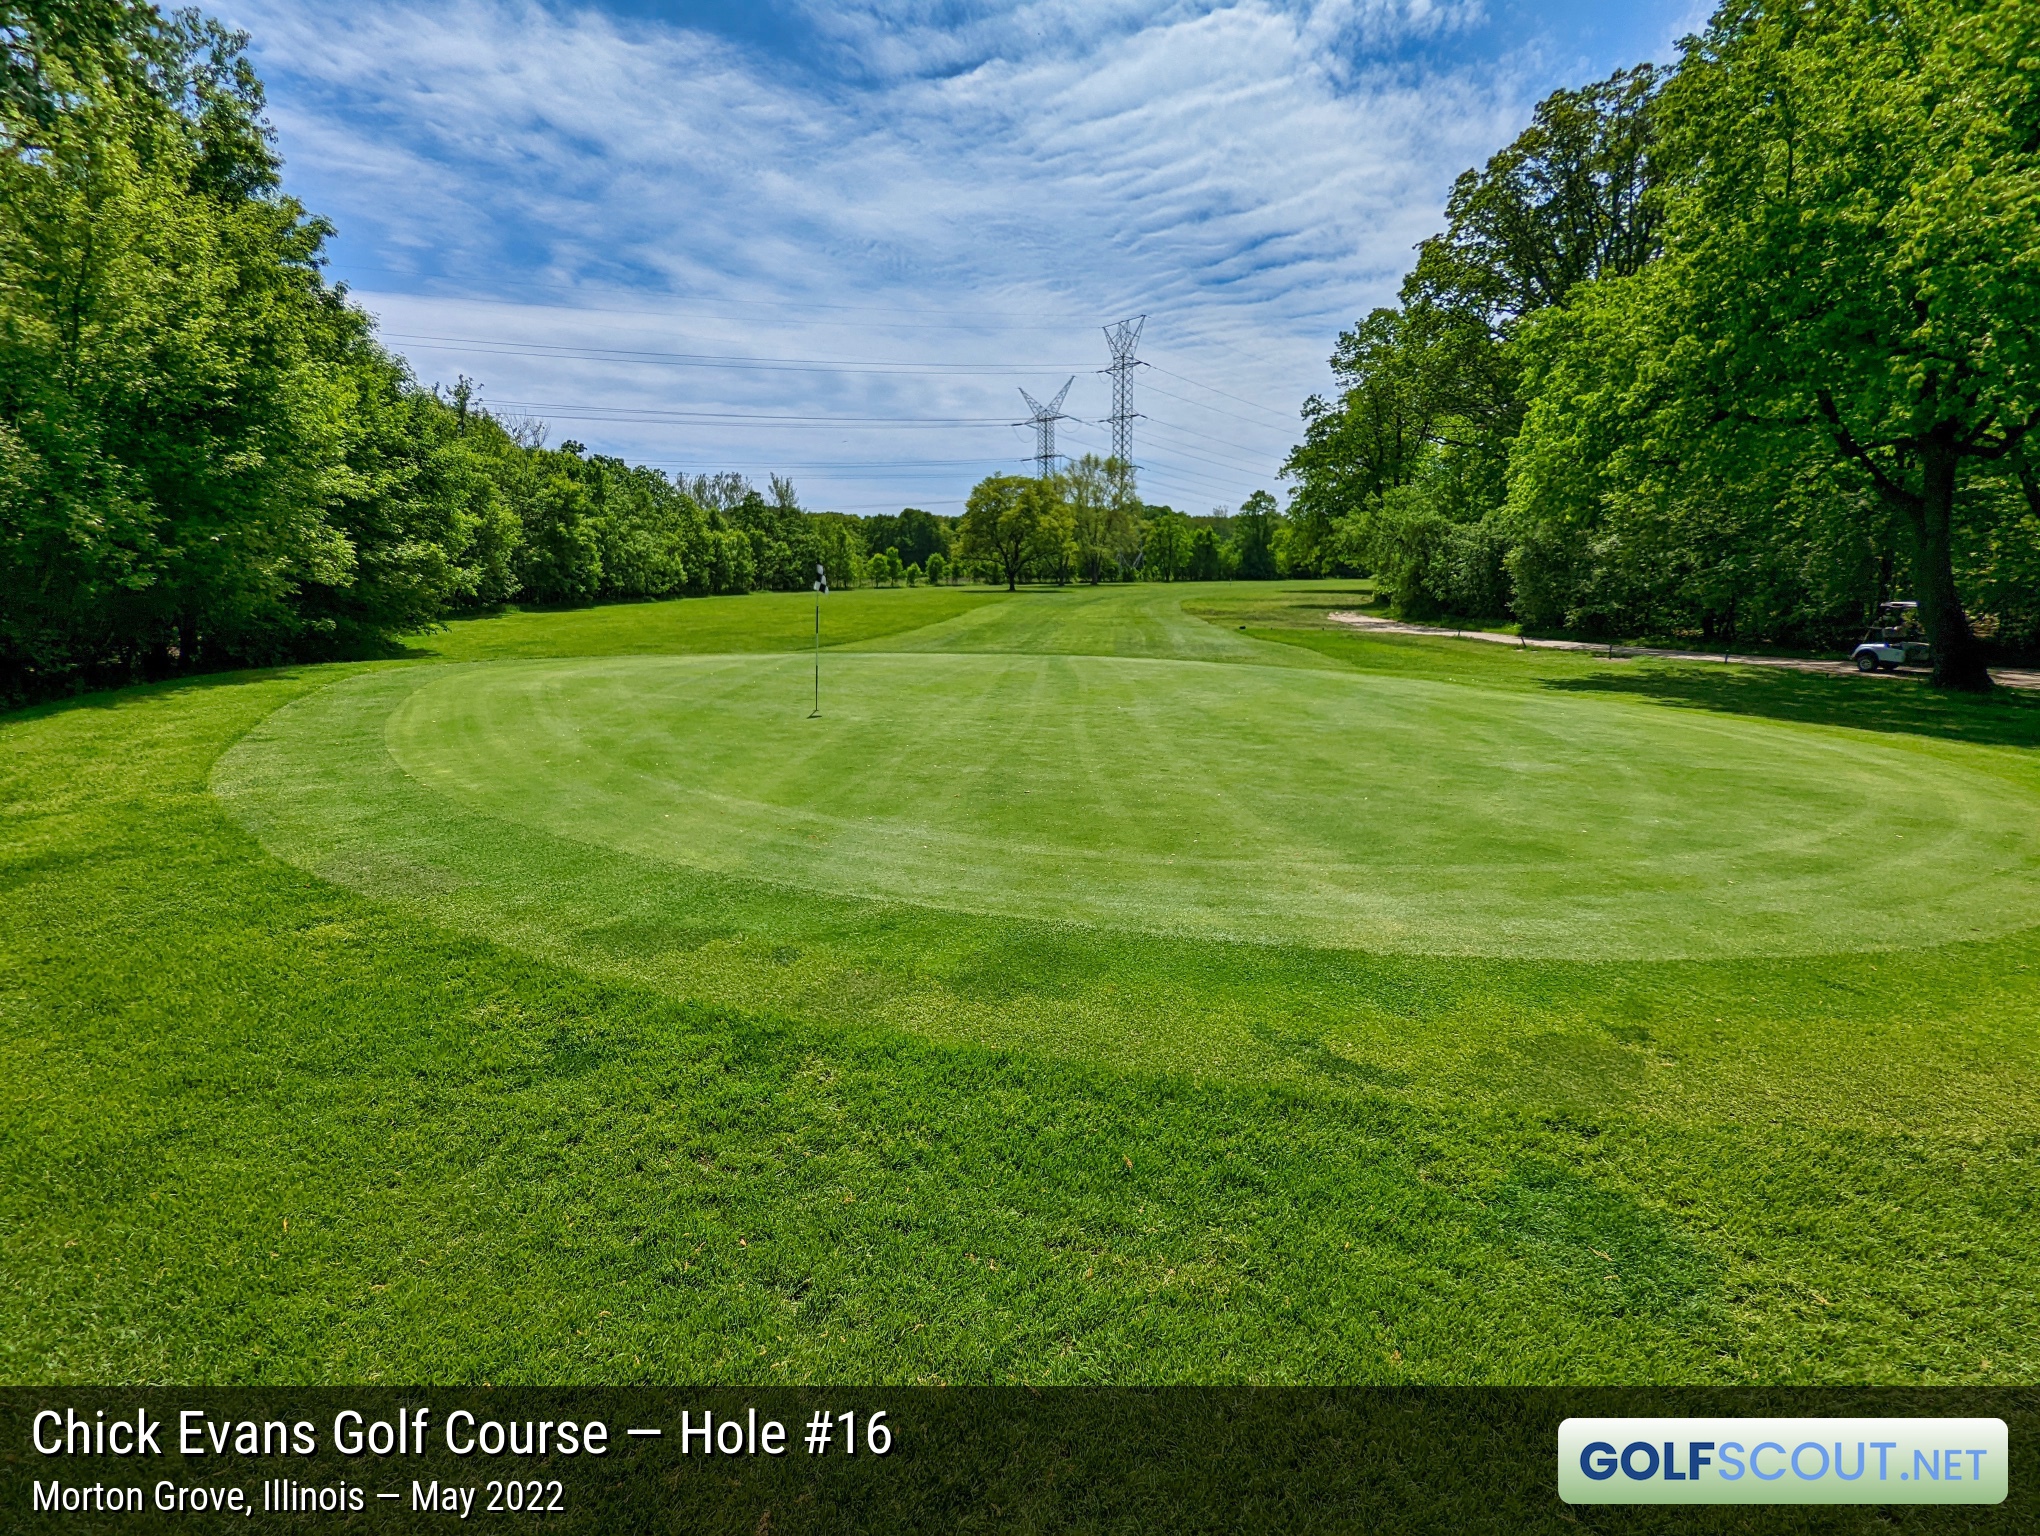 Photo of hole #16 at Chick Evans Golf Course in Morton Grove, Illinois. 